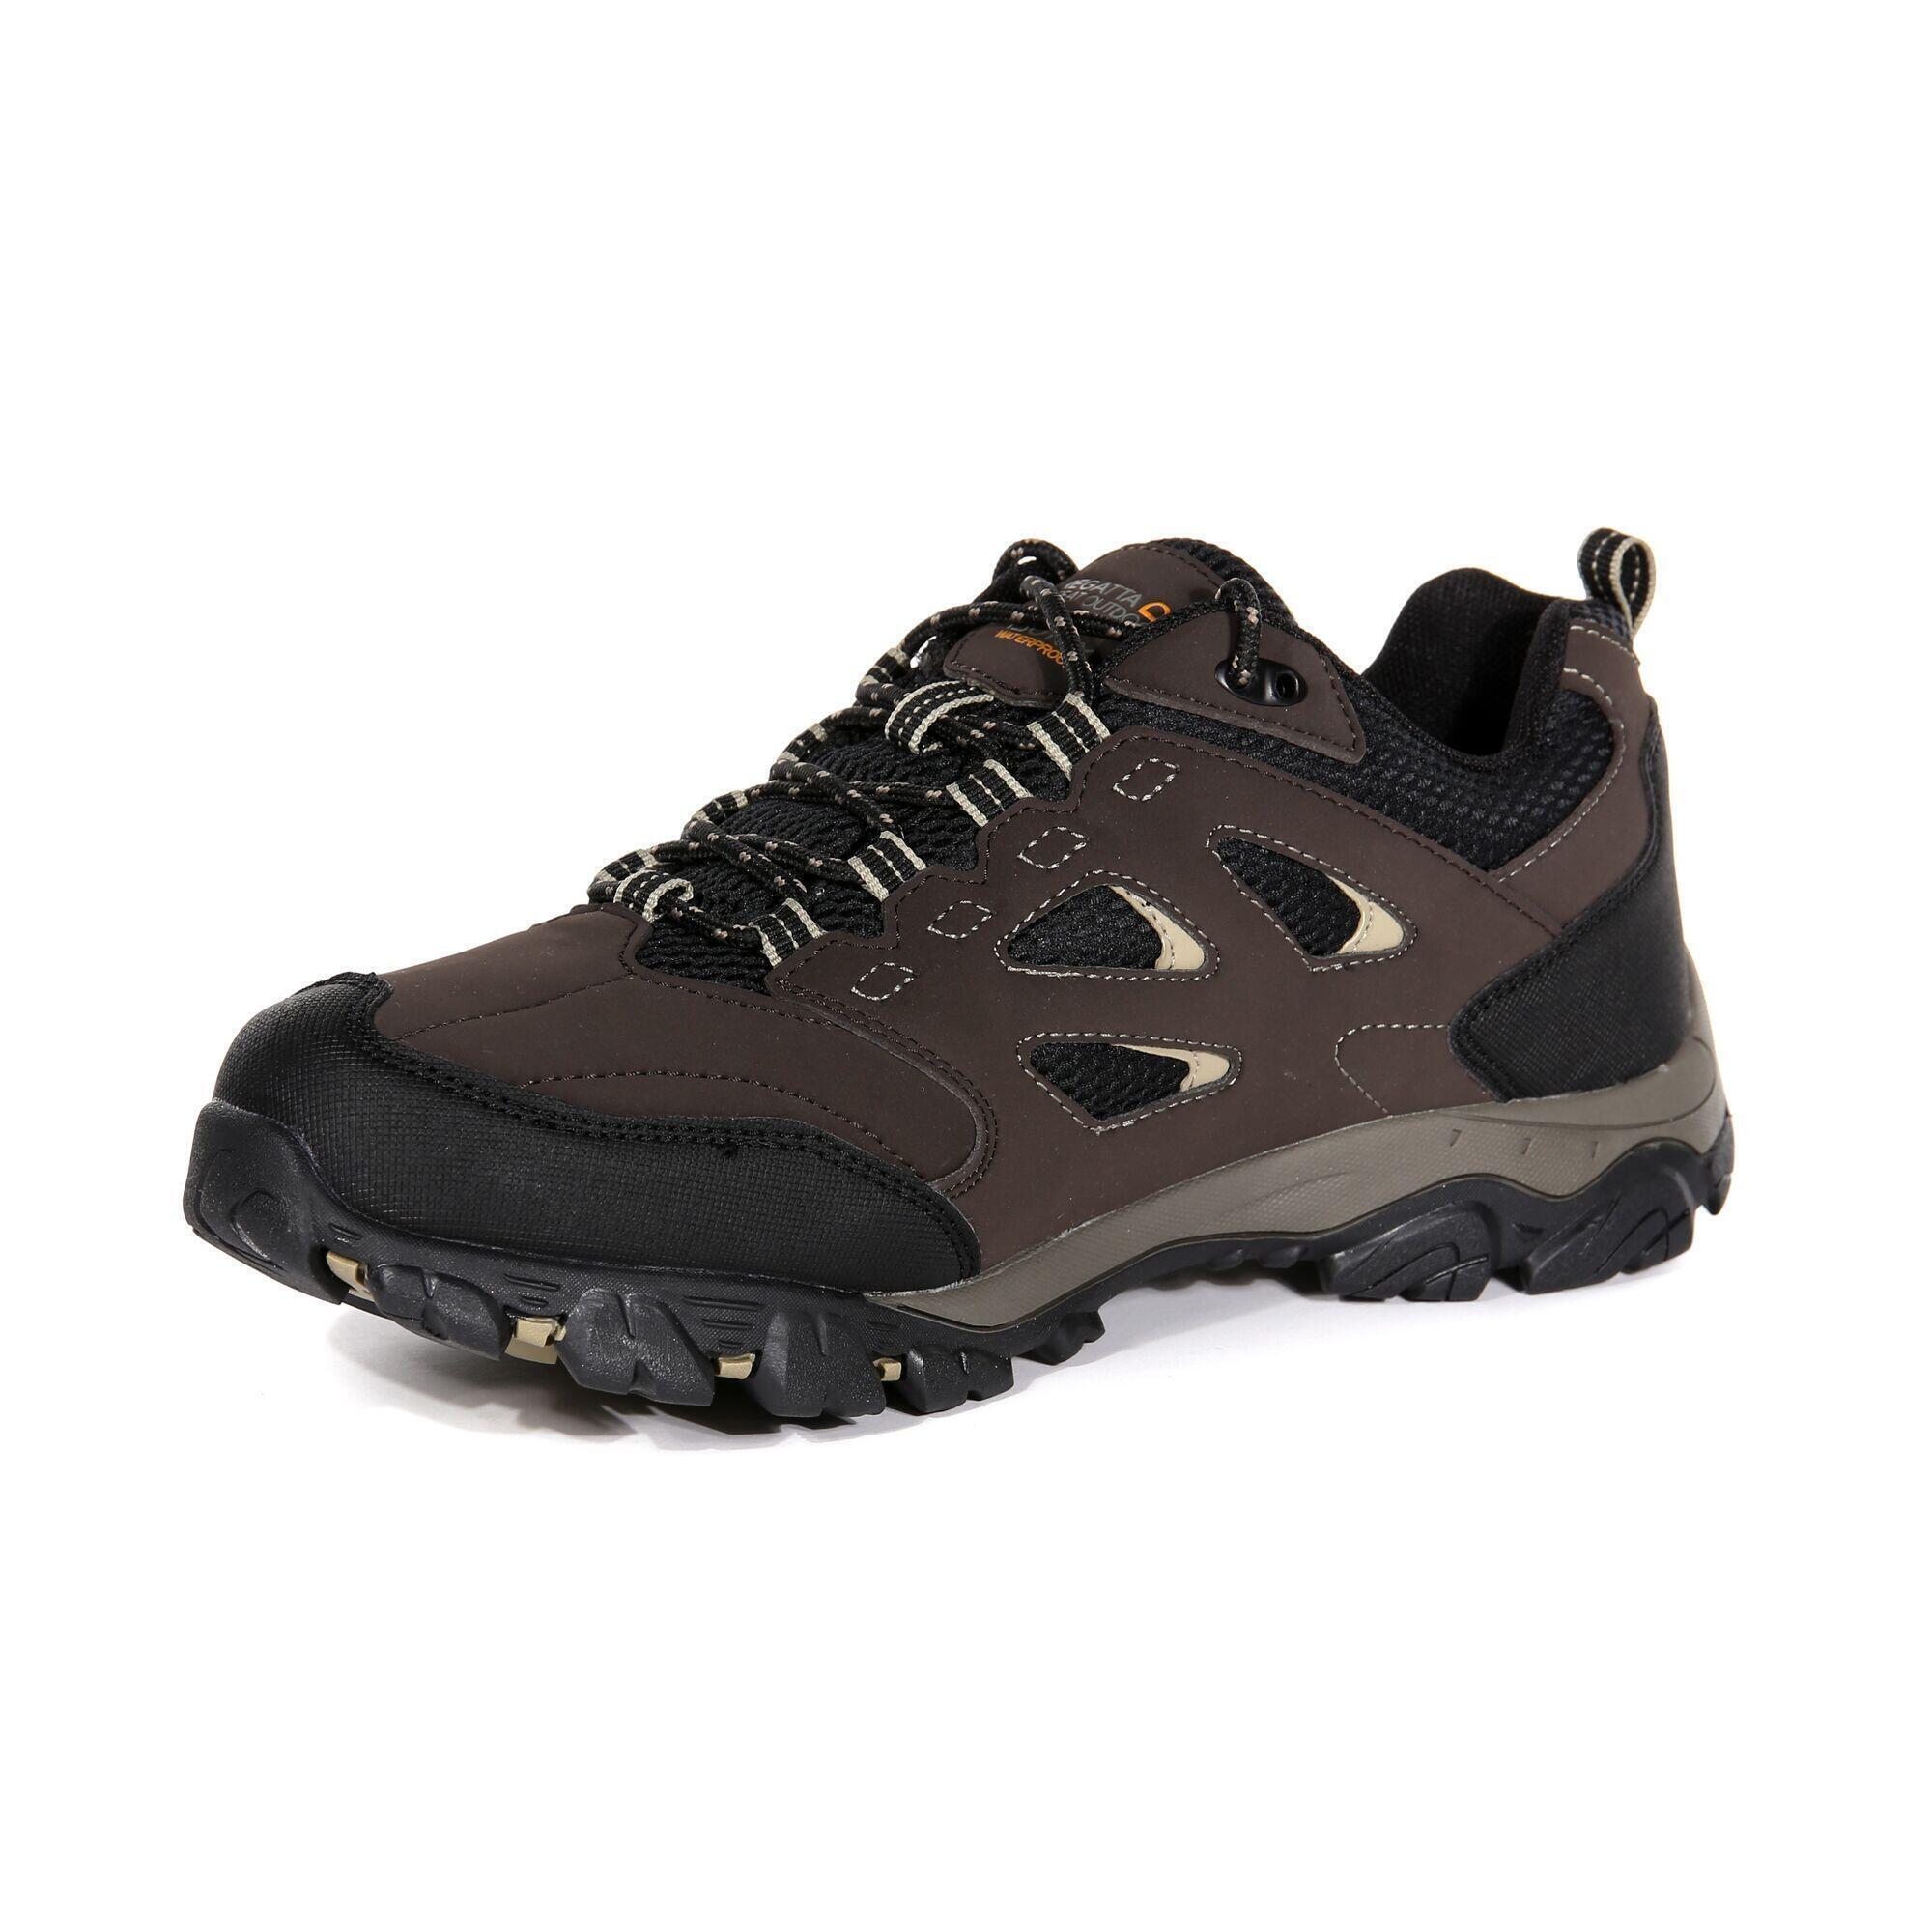 Holcombe IEP Low Men's Hiking Boots - Peat Brown 4/5